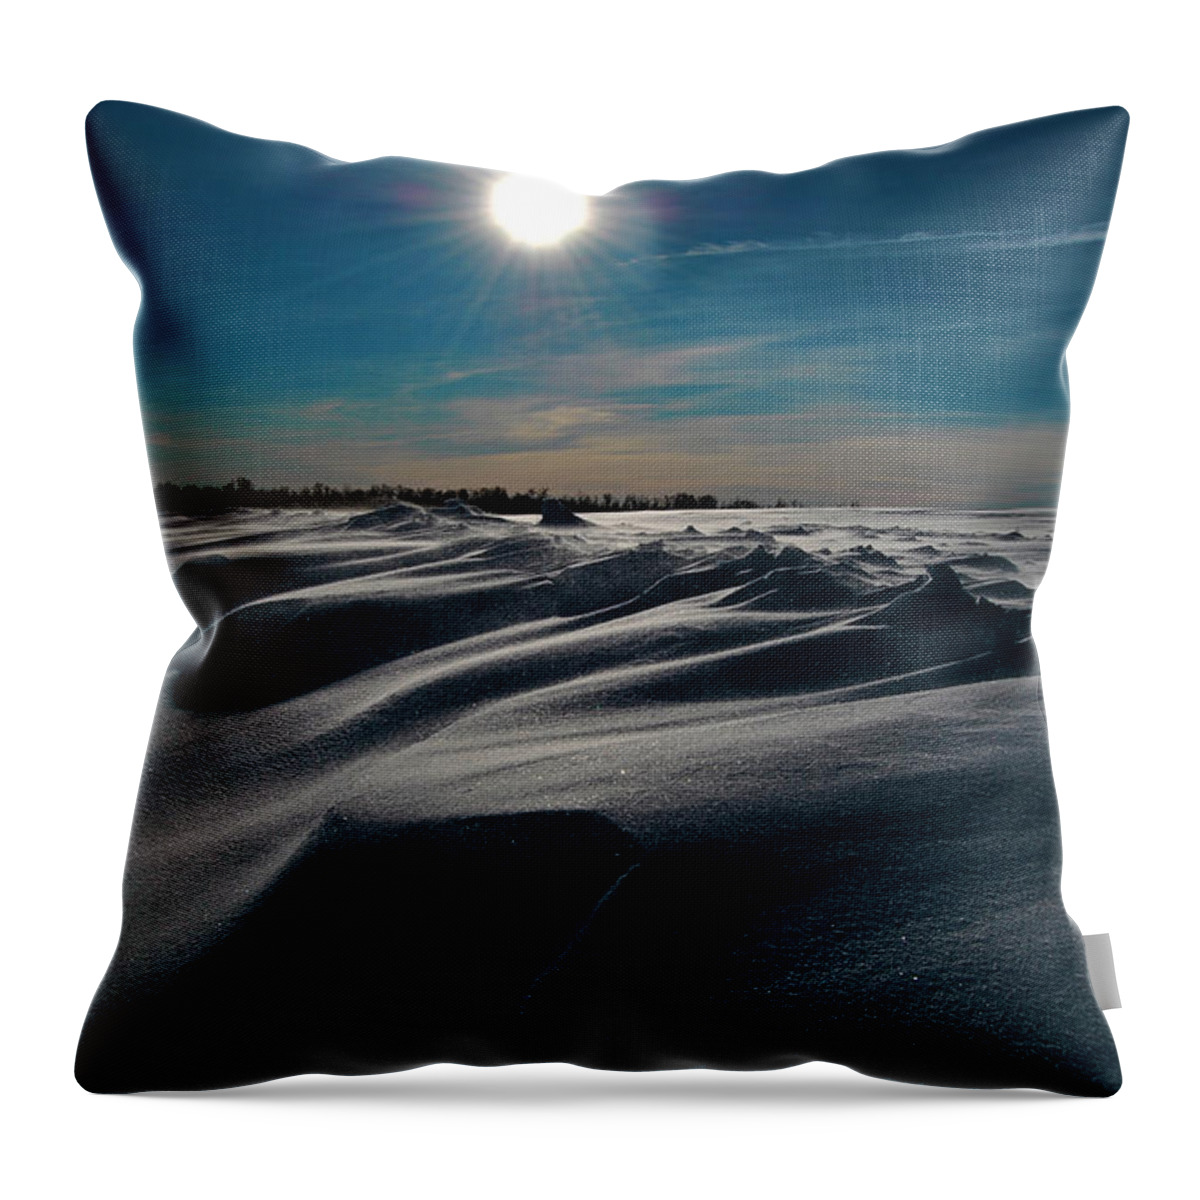 Sky Throw Pillow featuring the photograph Battling For Melt by J C